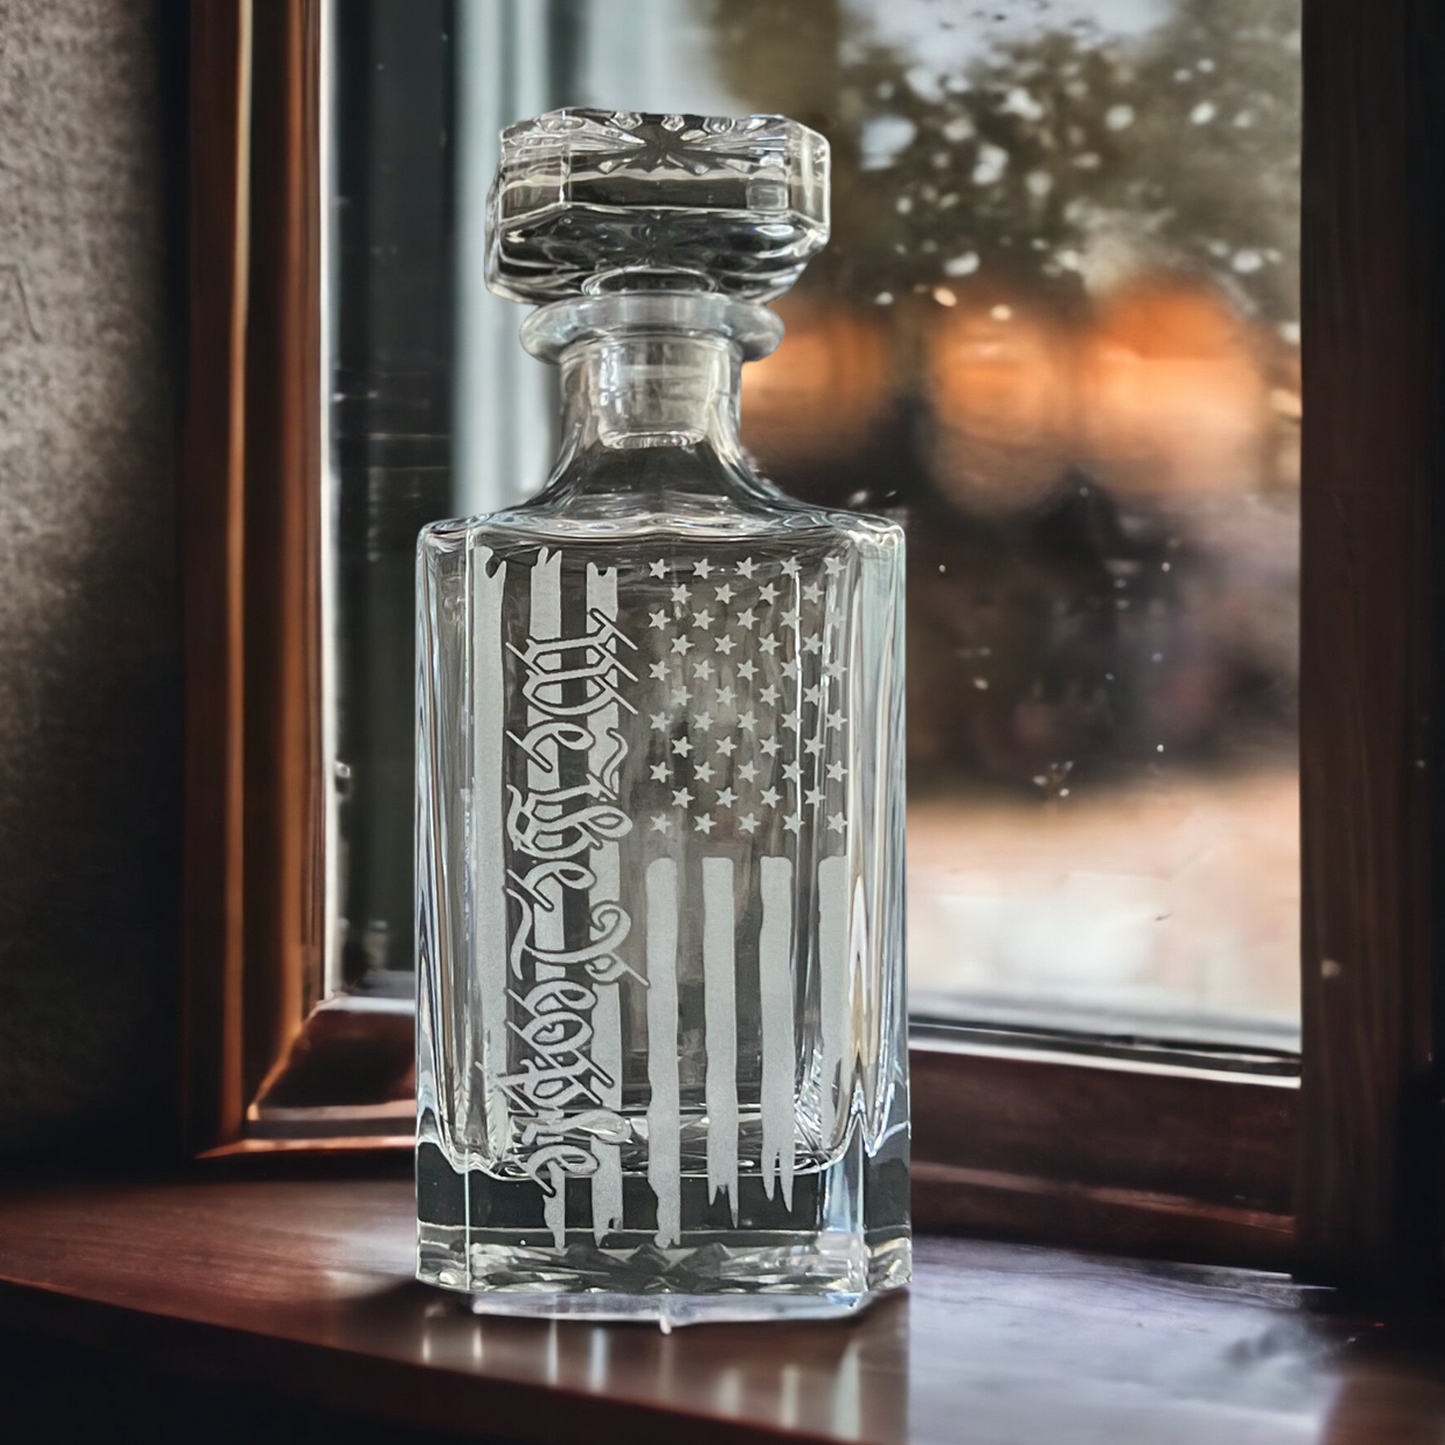 American flag Whiskey glass decanter